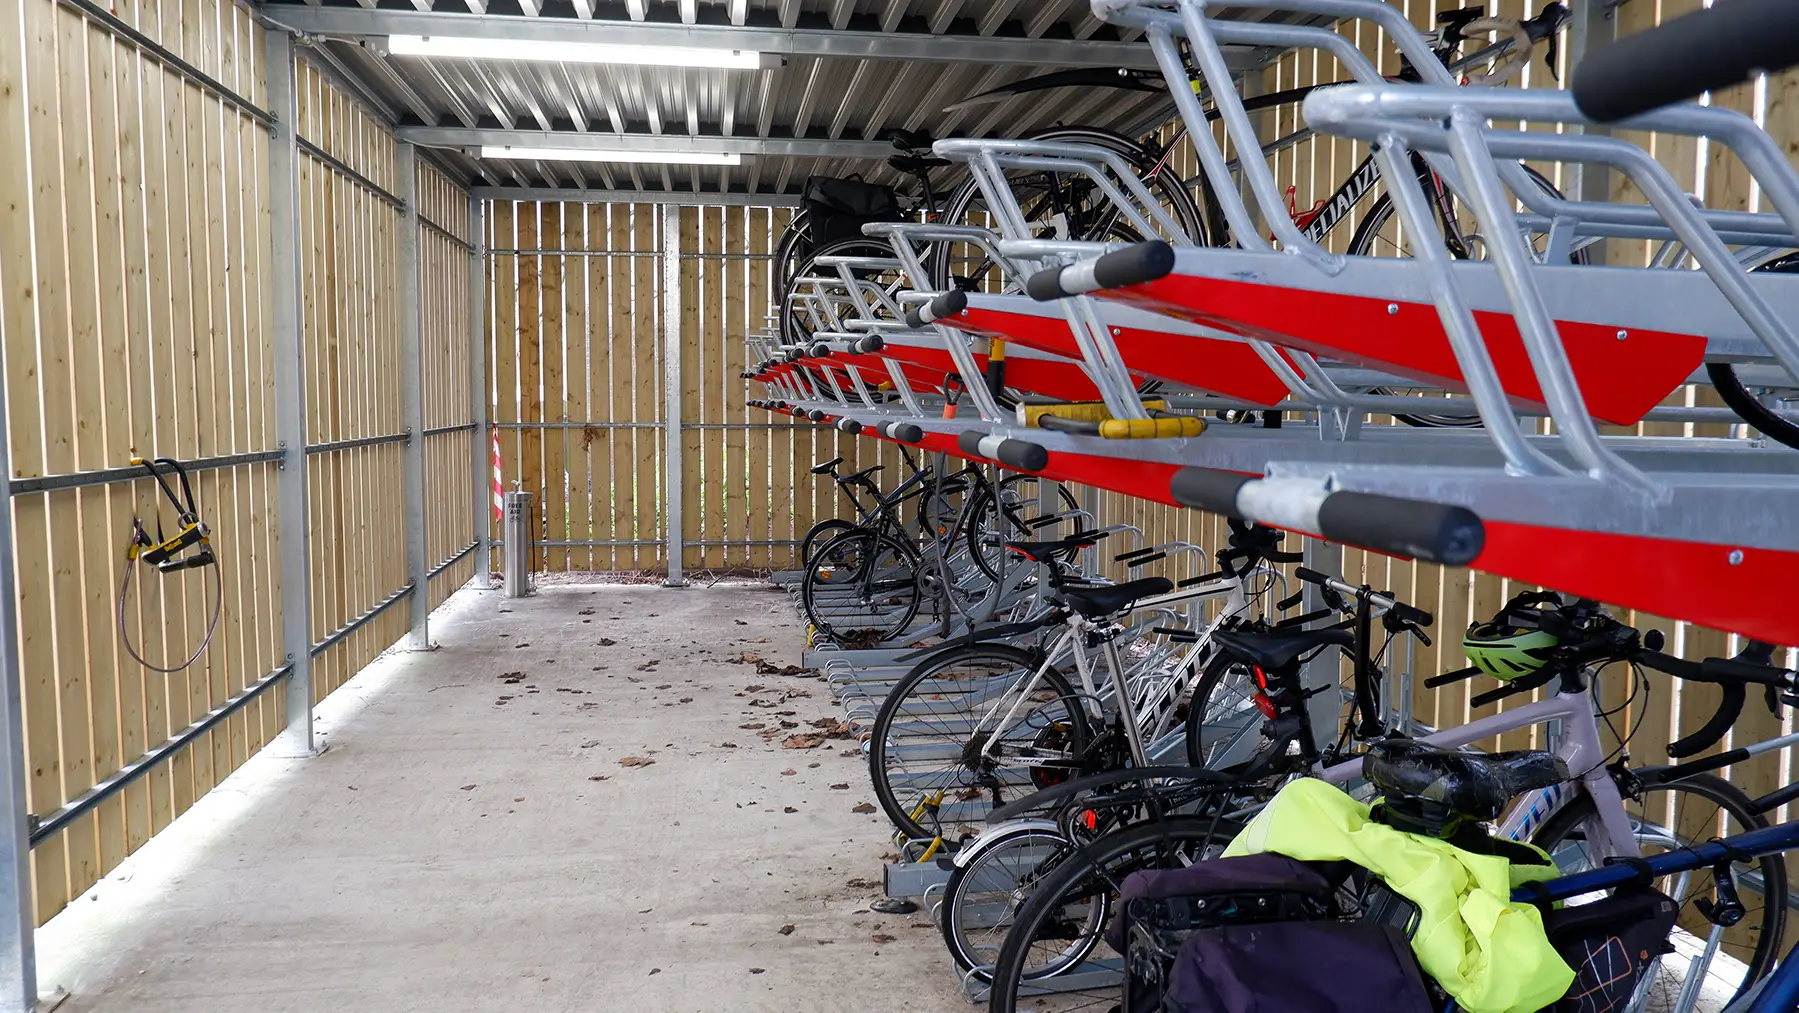 A double-decker bicycle rack filled with bicycles, offering space-saving storage for multiple bikes.